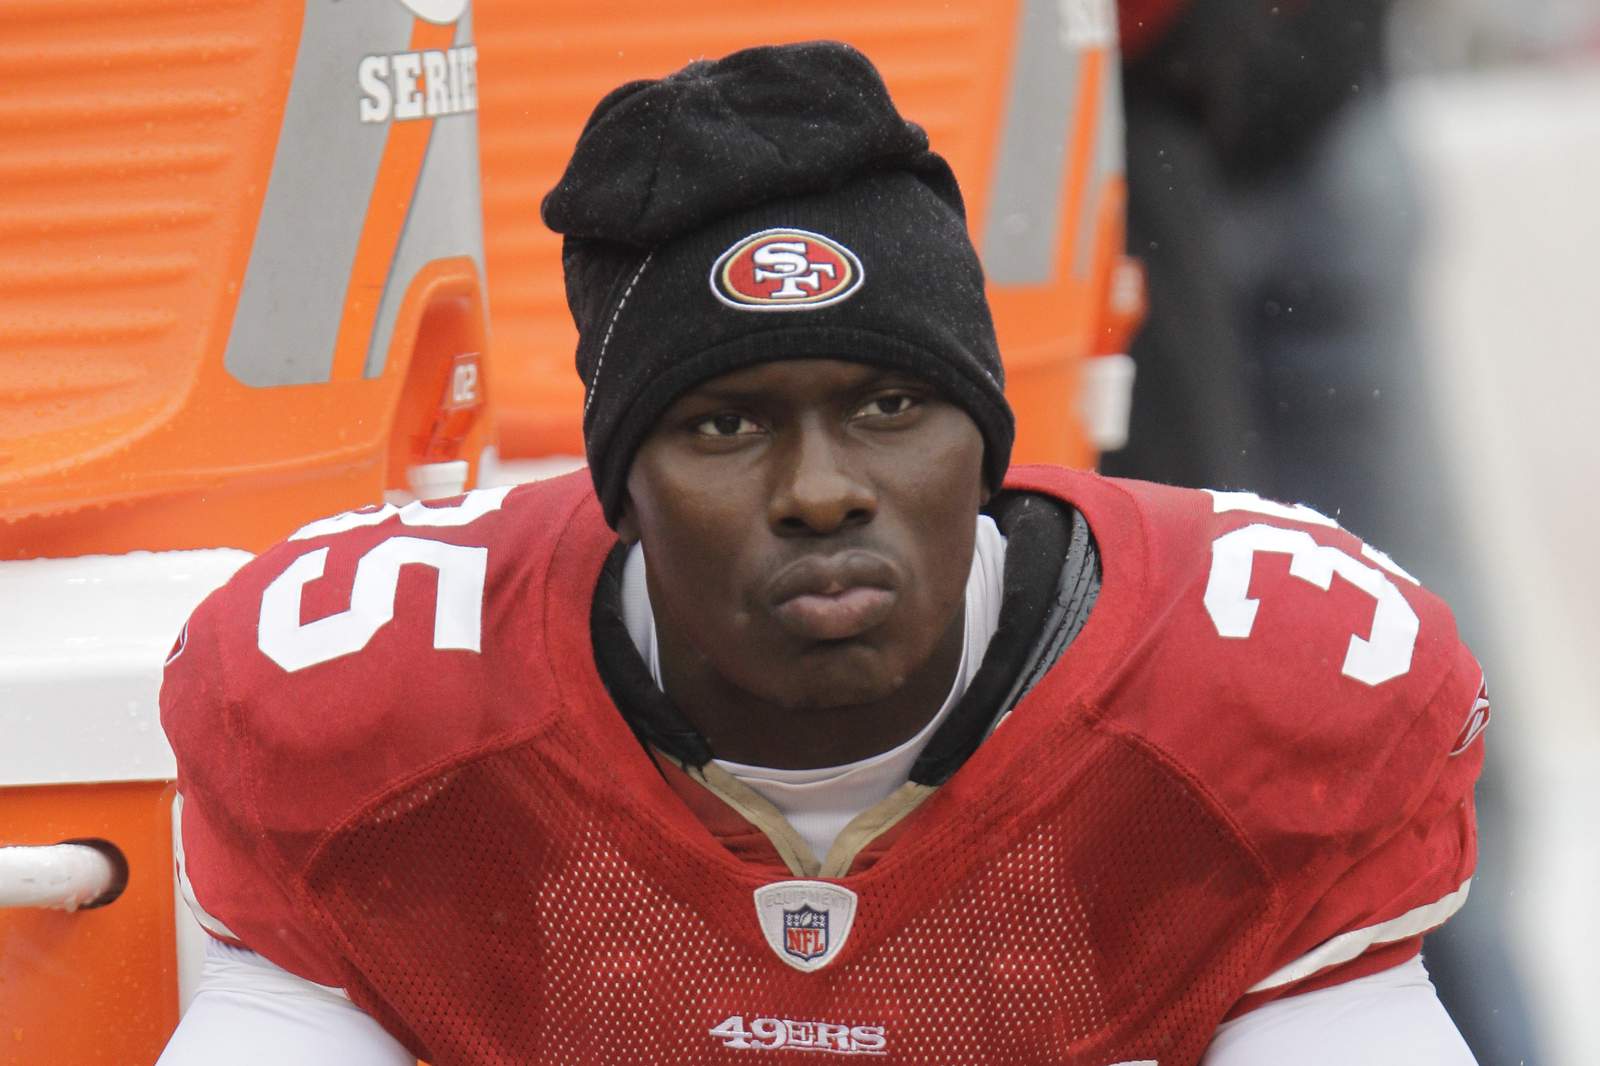 Ex-NFL player's brain to be probed for trauma-related harm